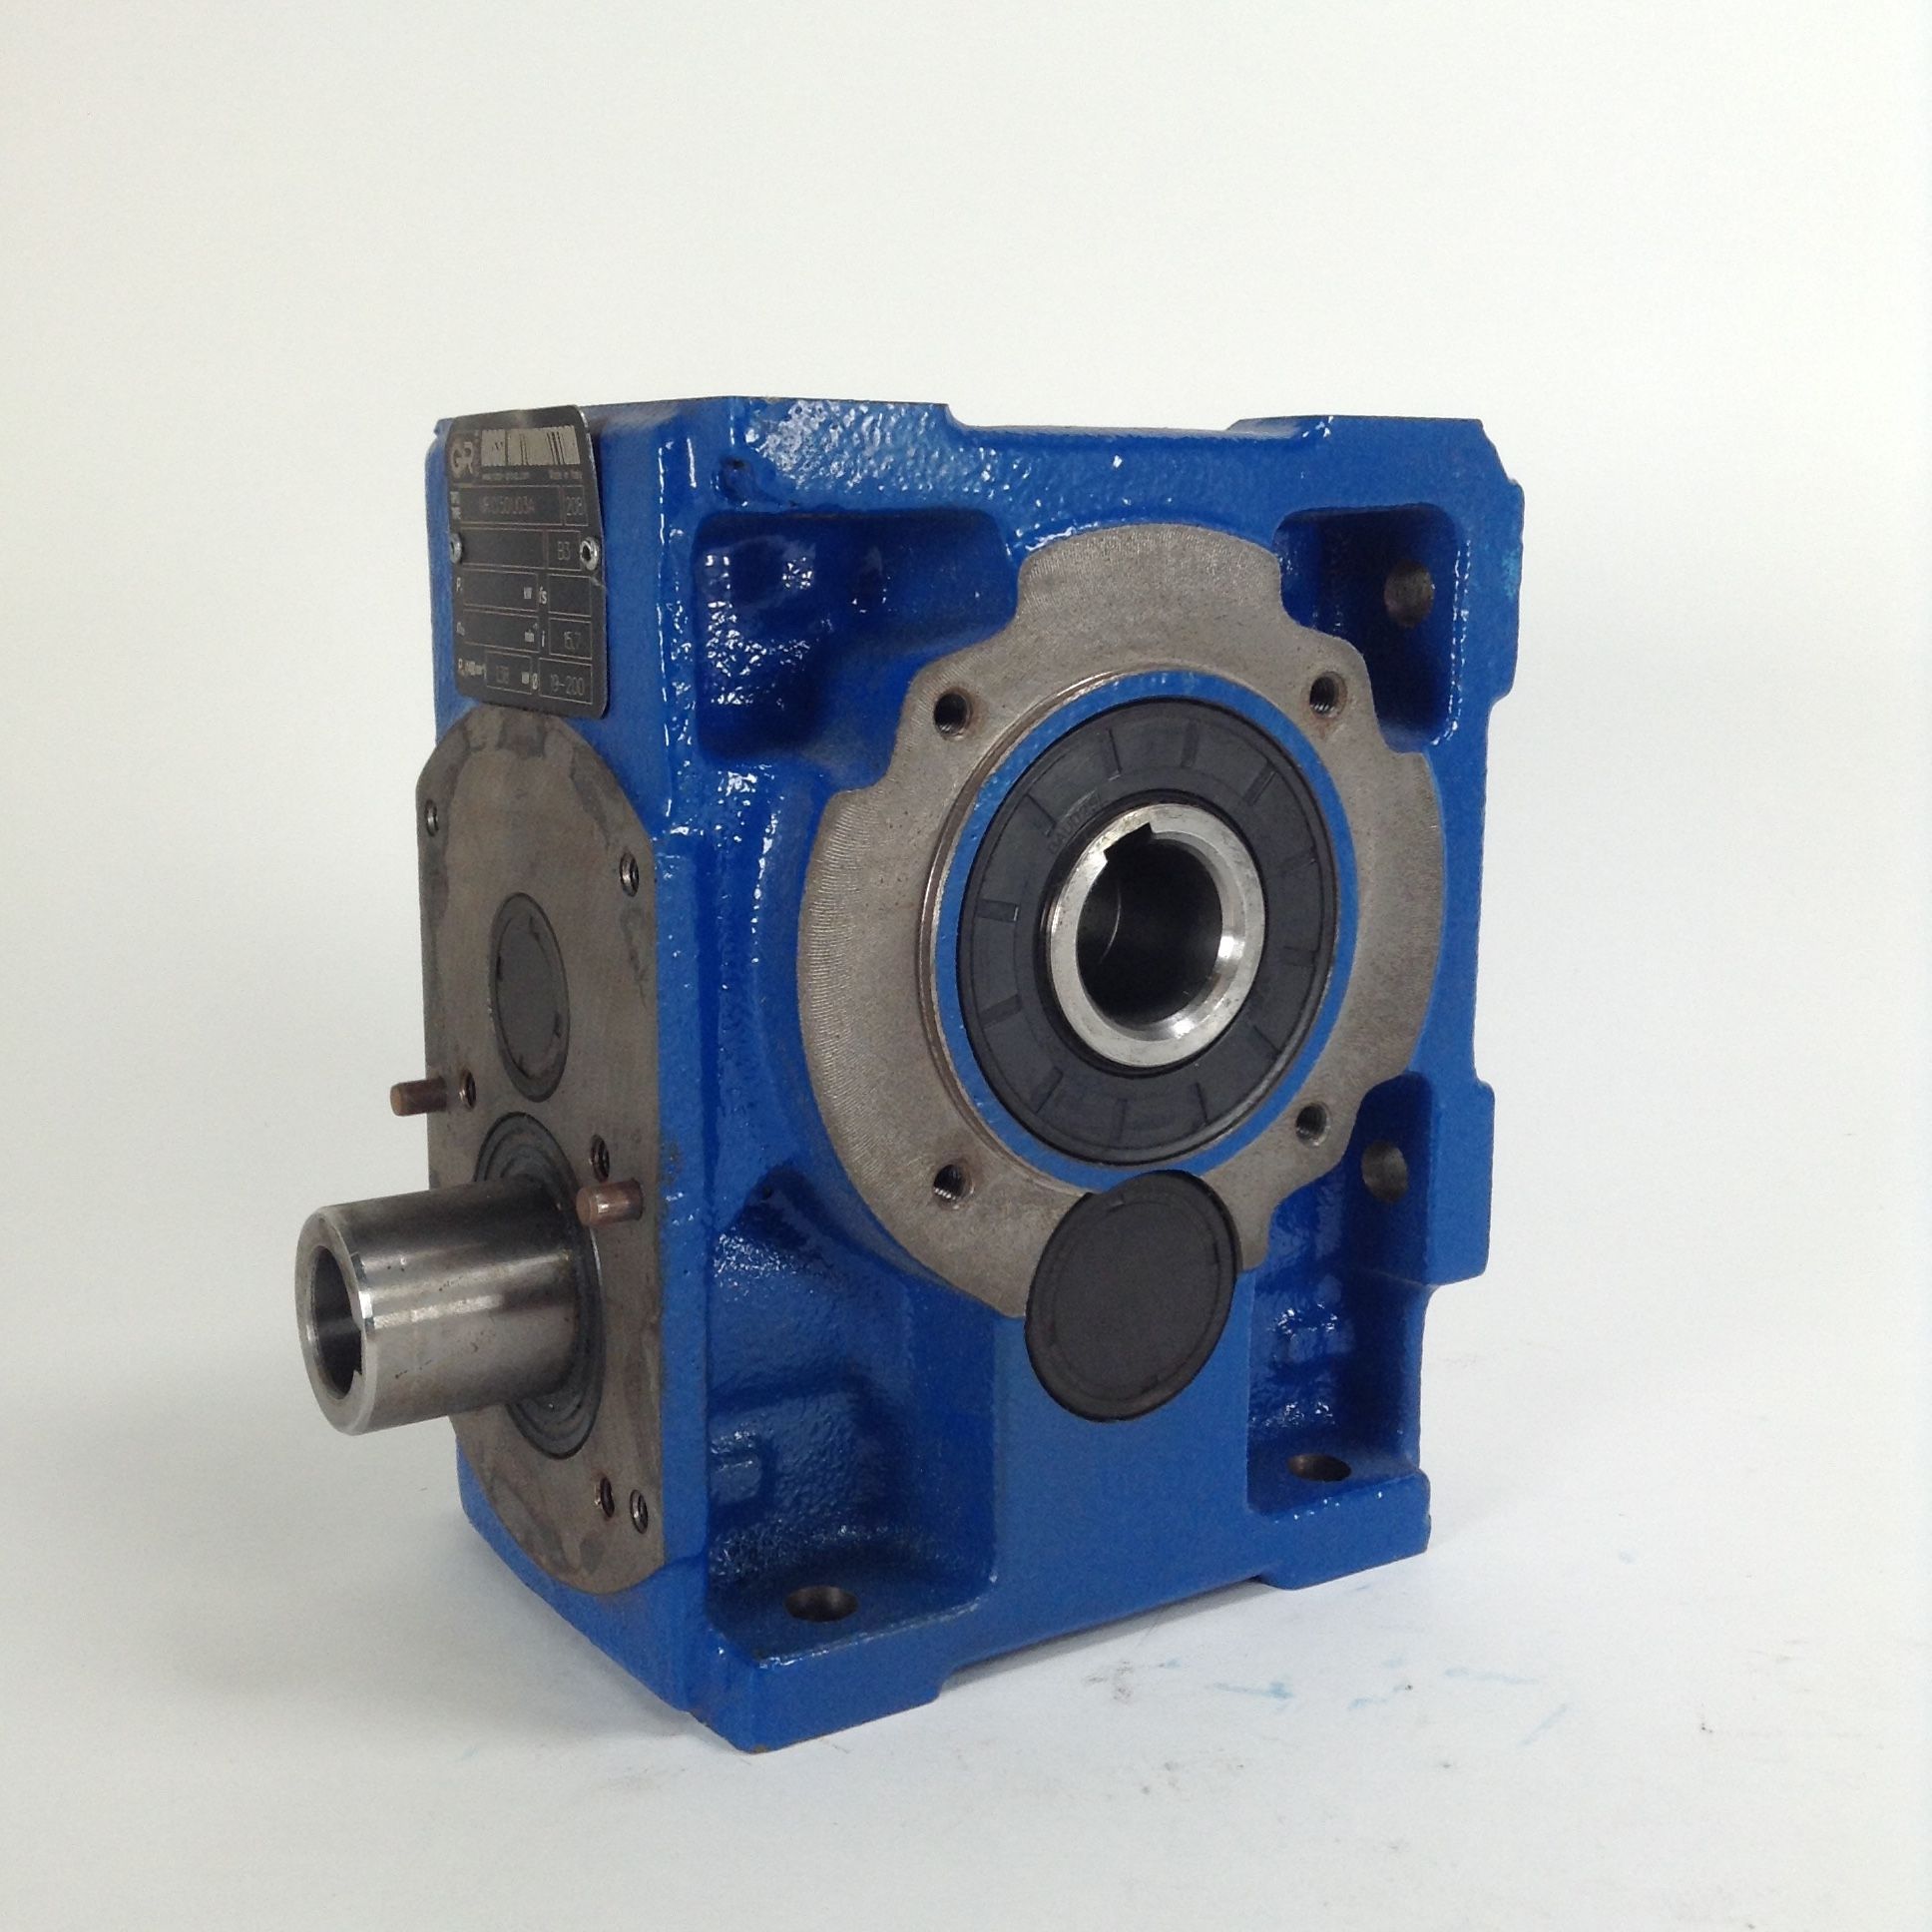 Rossi Motoriduttori MR CI 50 UO3A Helical gearbox B3 i:15,7 1.38kW NEW NMP 